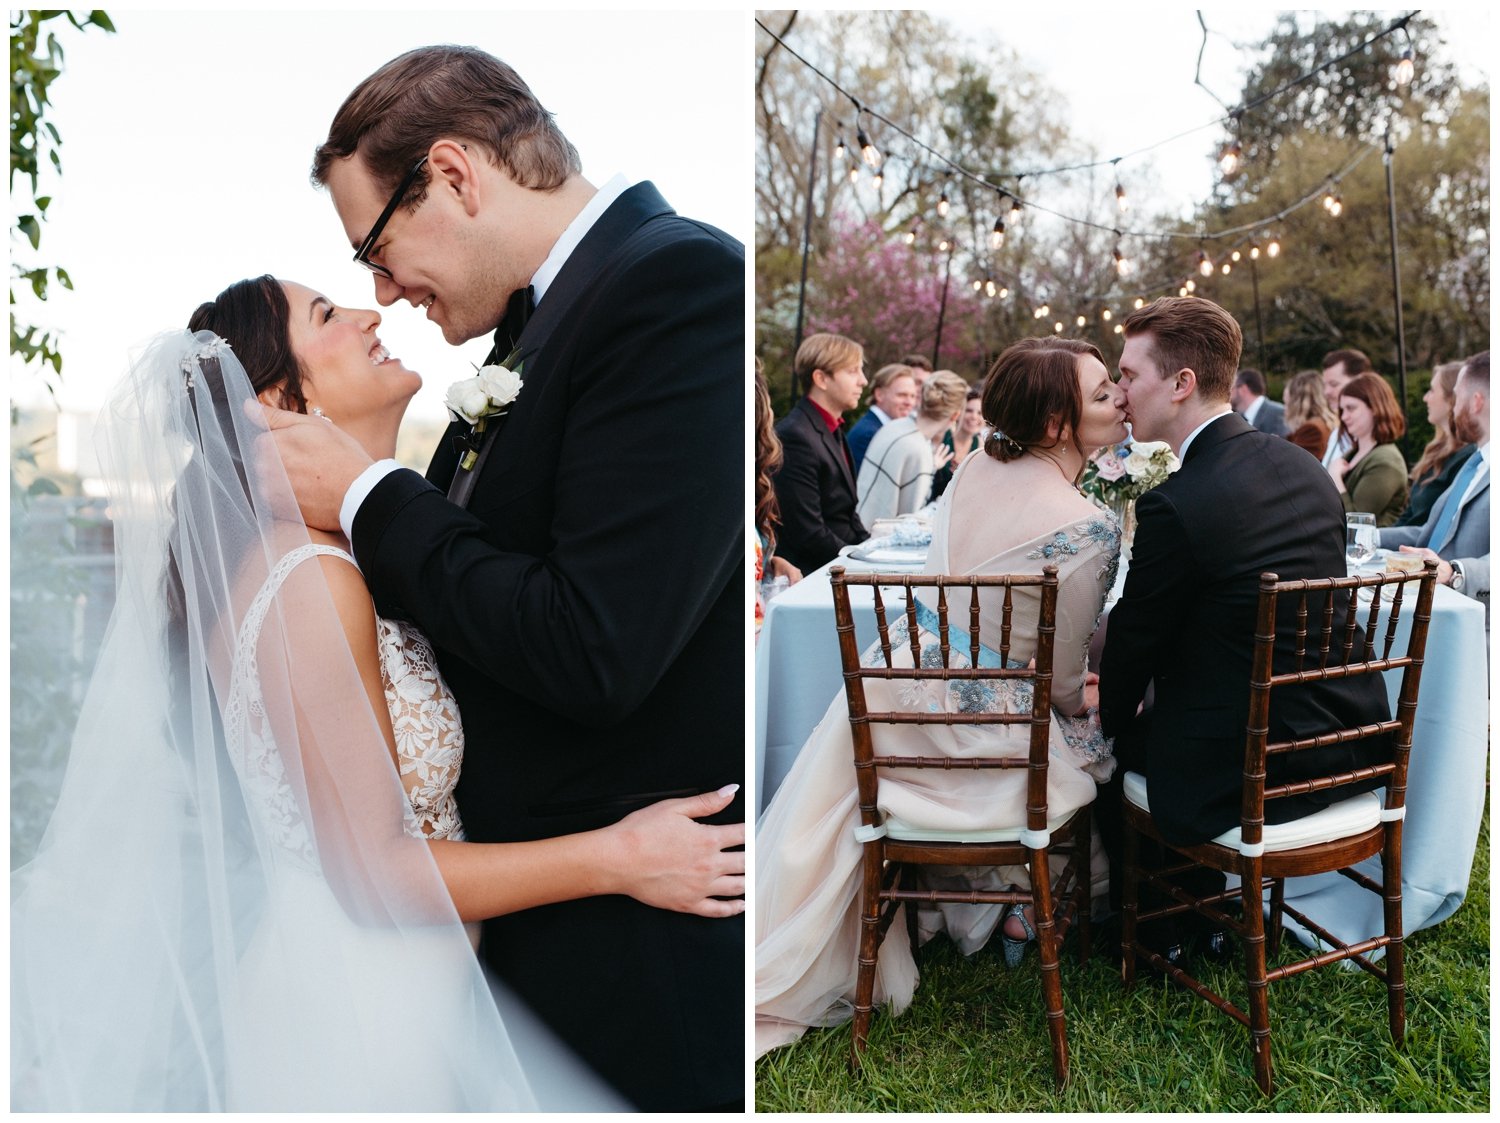 Small wedding reception ideas on how to pick the right photographer. Couples embrace after their weddings